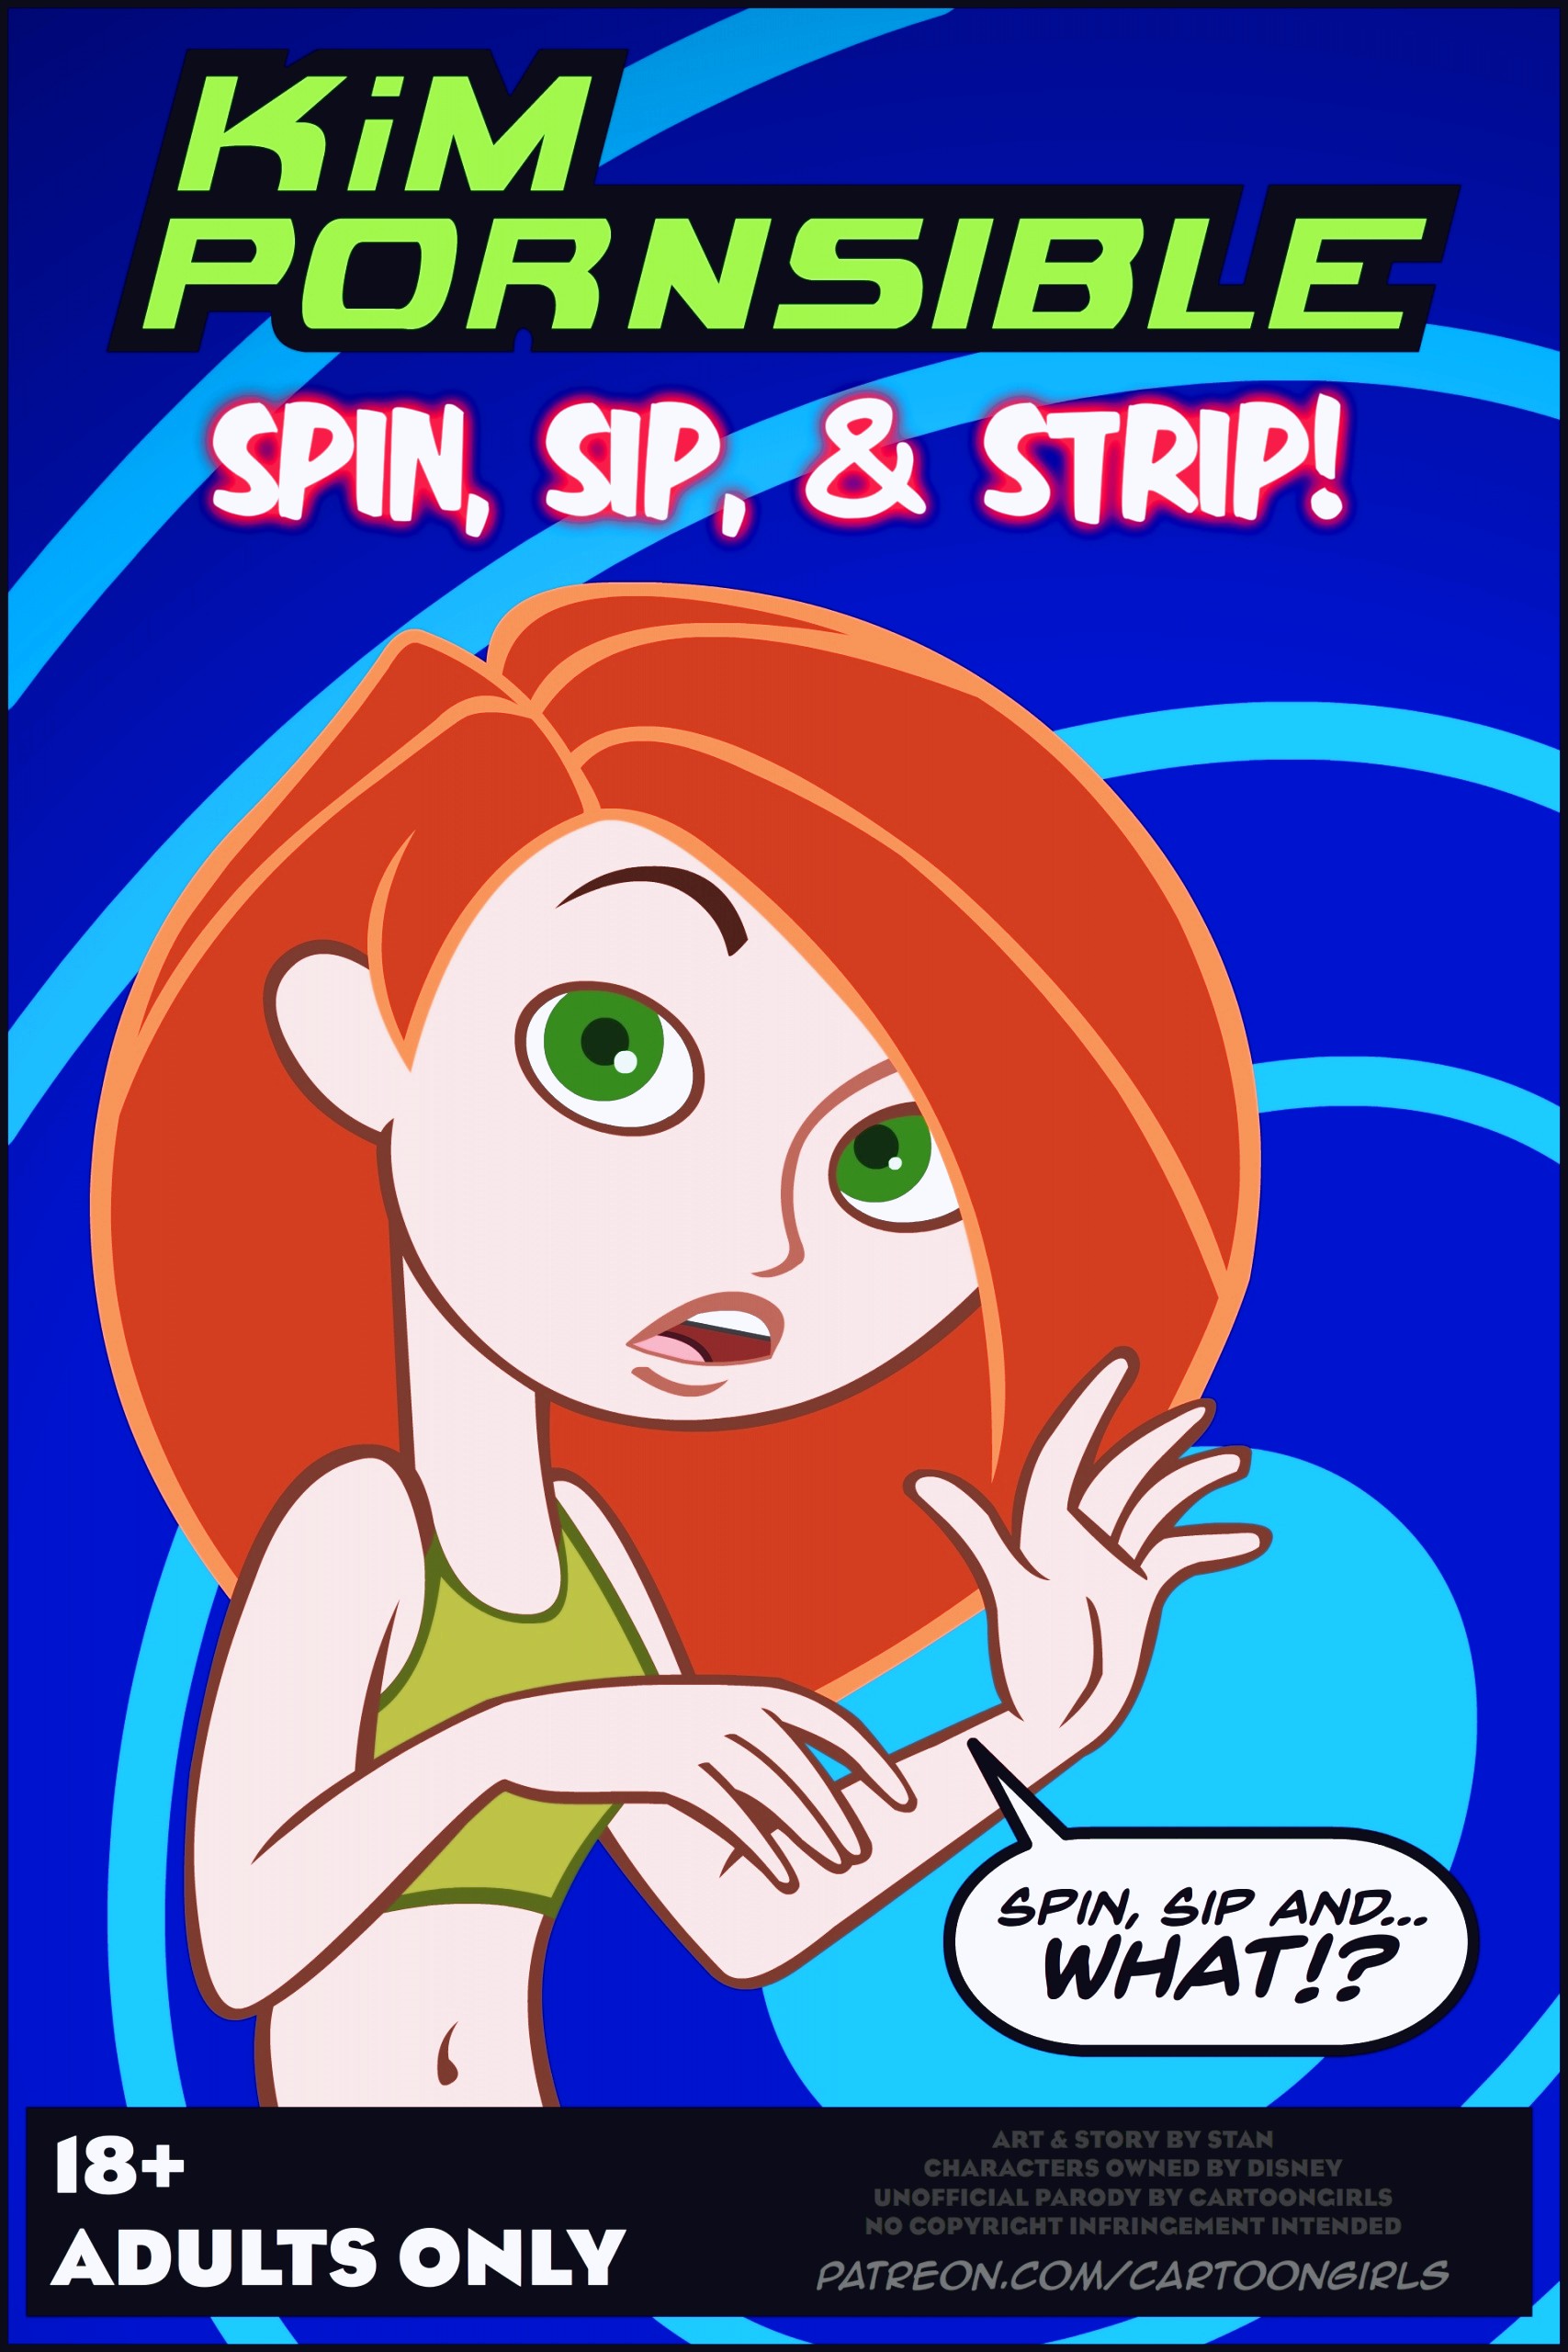 Kim Possible Spin, Sip & Strip porn comic page 01 on category Kim Possible